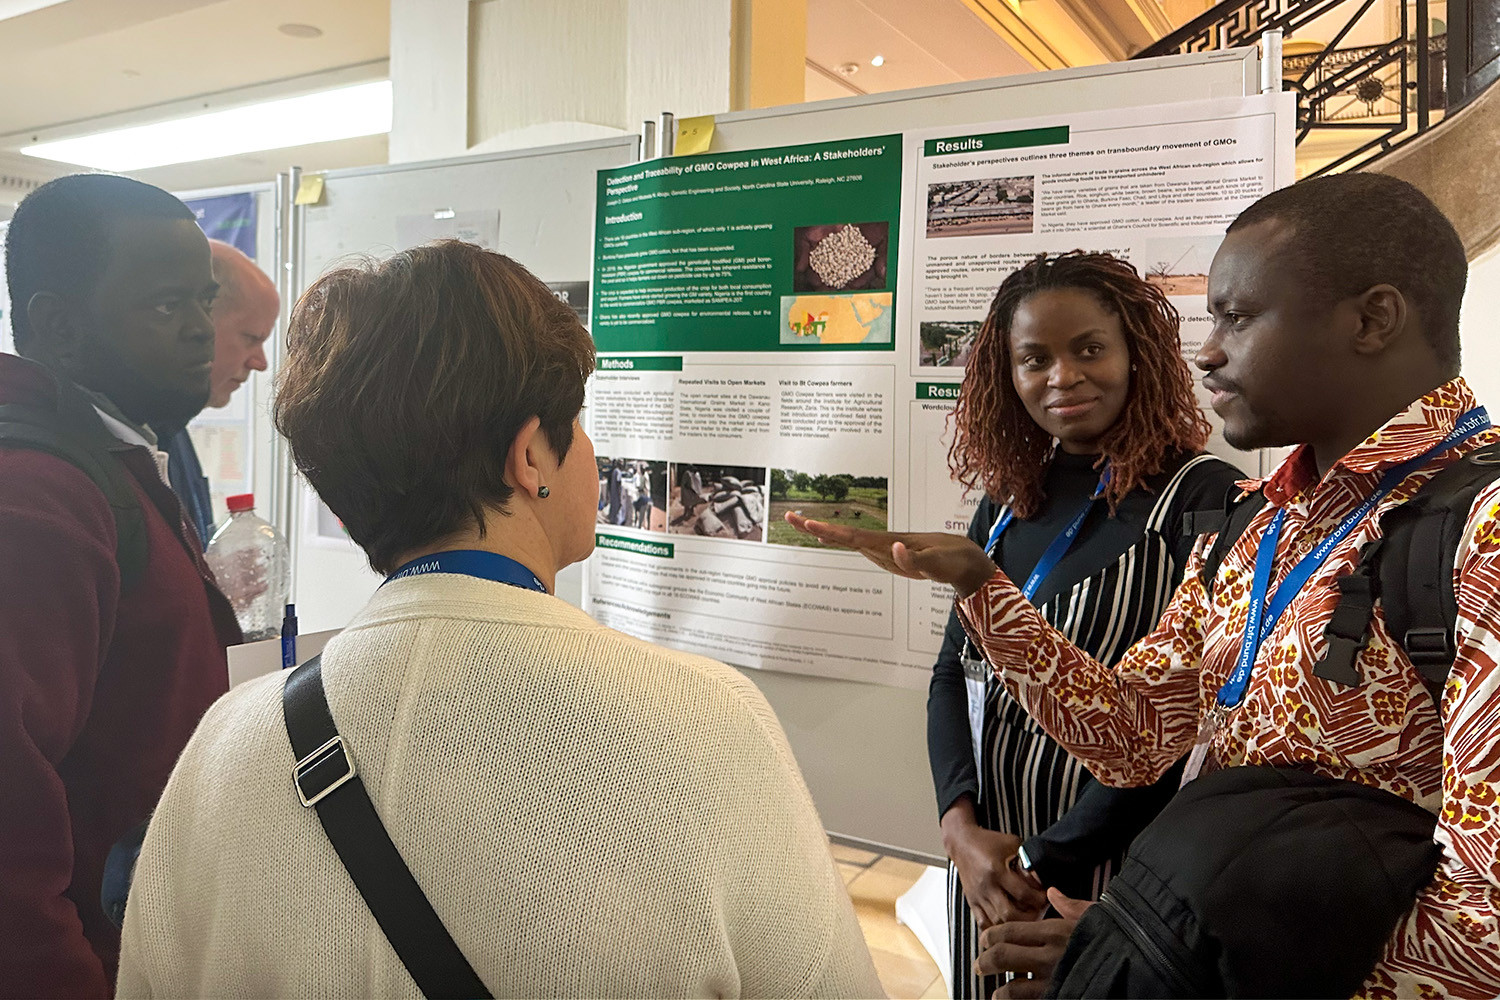 Joseph Gakpo and Modesta Abugu presented their poster "Detection and Traceability of GMO Cowpea in West Africa: A Stakeholder's Perspective" at the International Conference on GMO Analysis and New Genomic Techniques. March 2023.